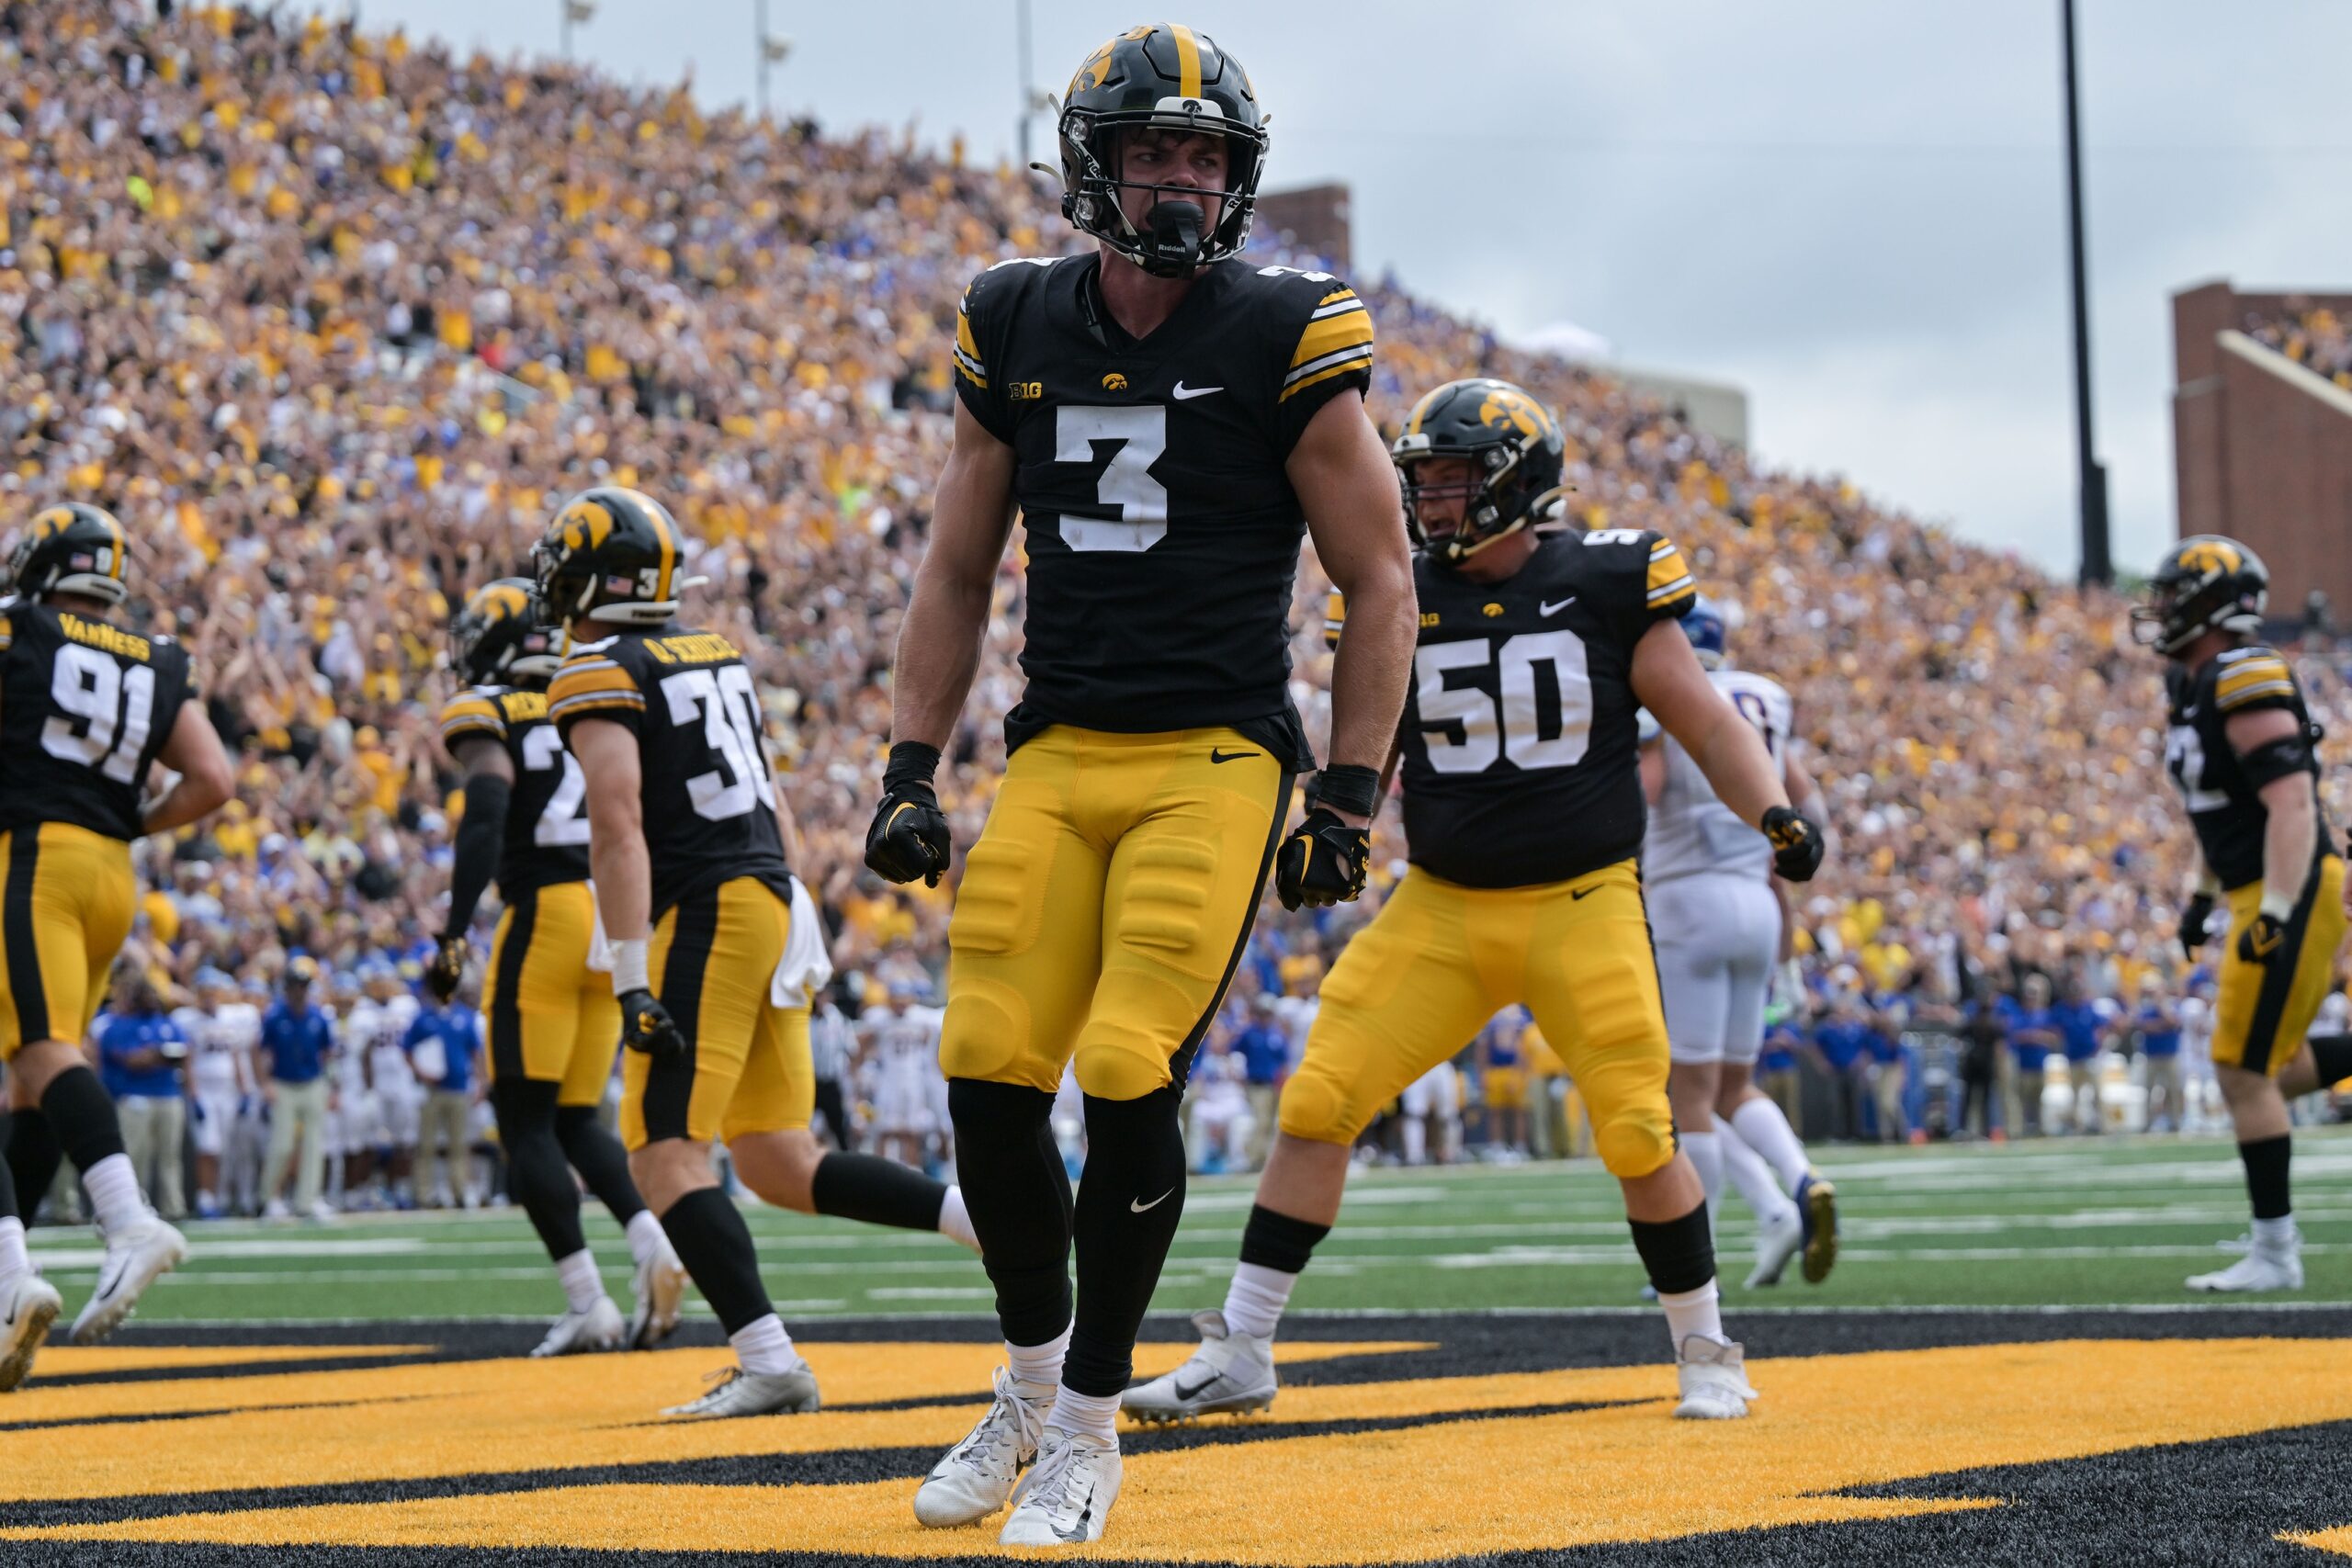 Cooper DeJean (3) reacts after the Hawkeyes score on a safety against the South Dakota State Jackrabbits during the third quarter at Kinnick Stadium.